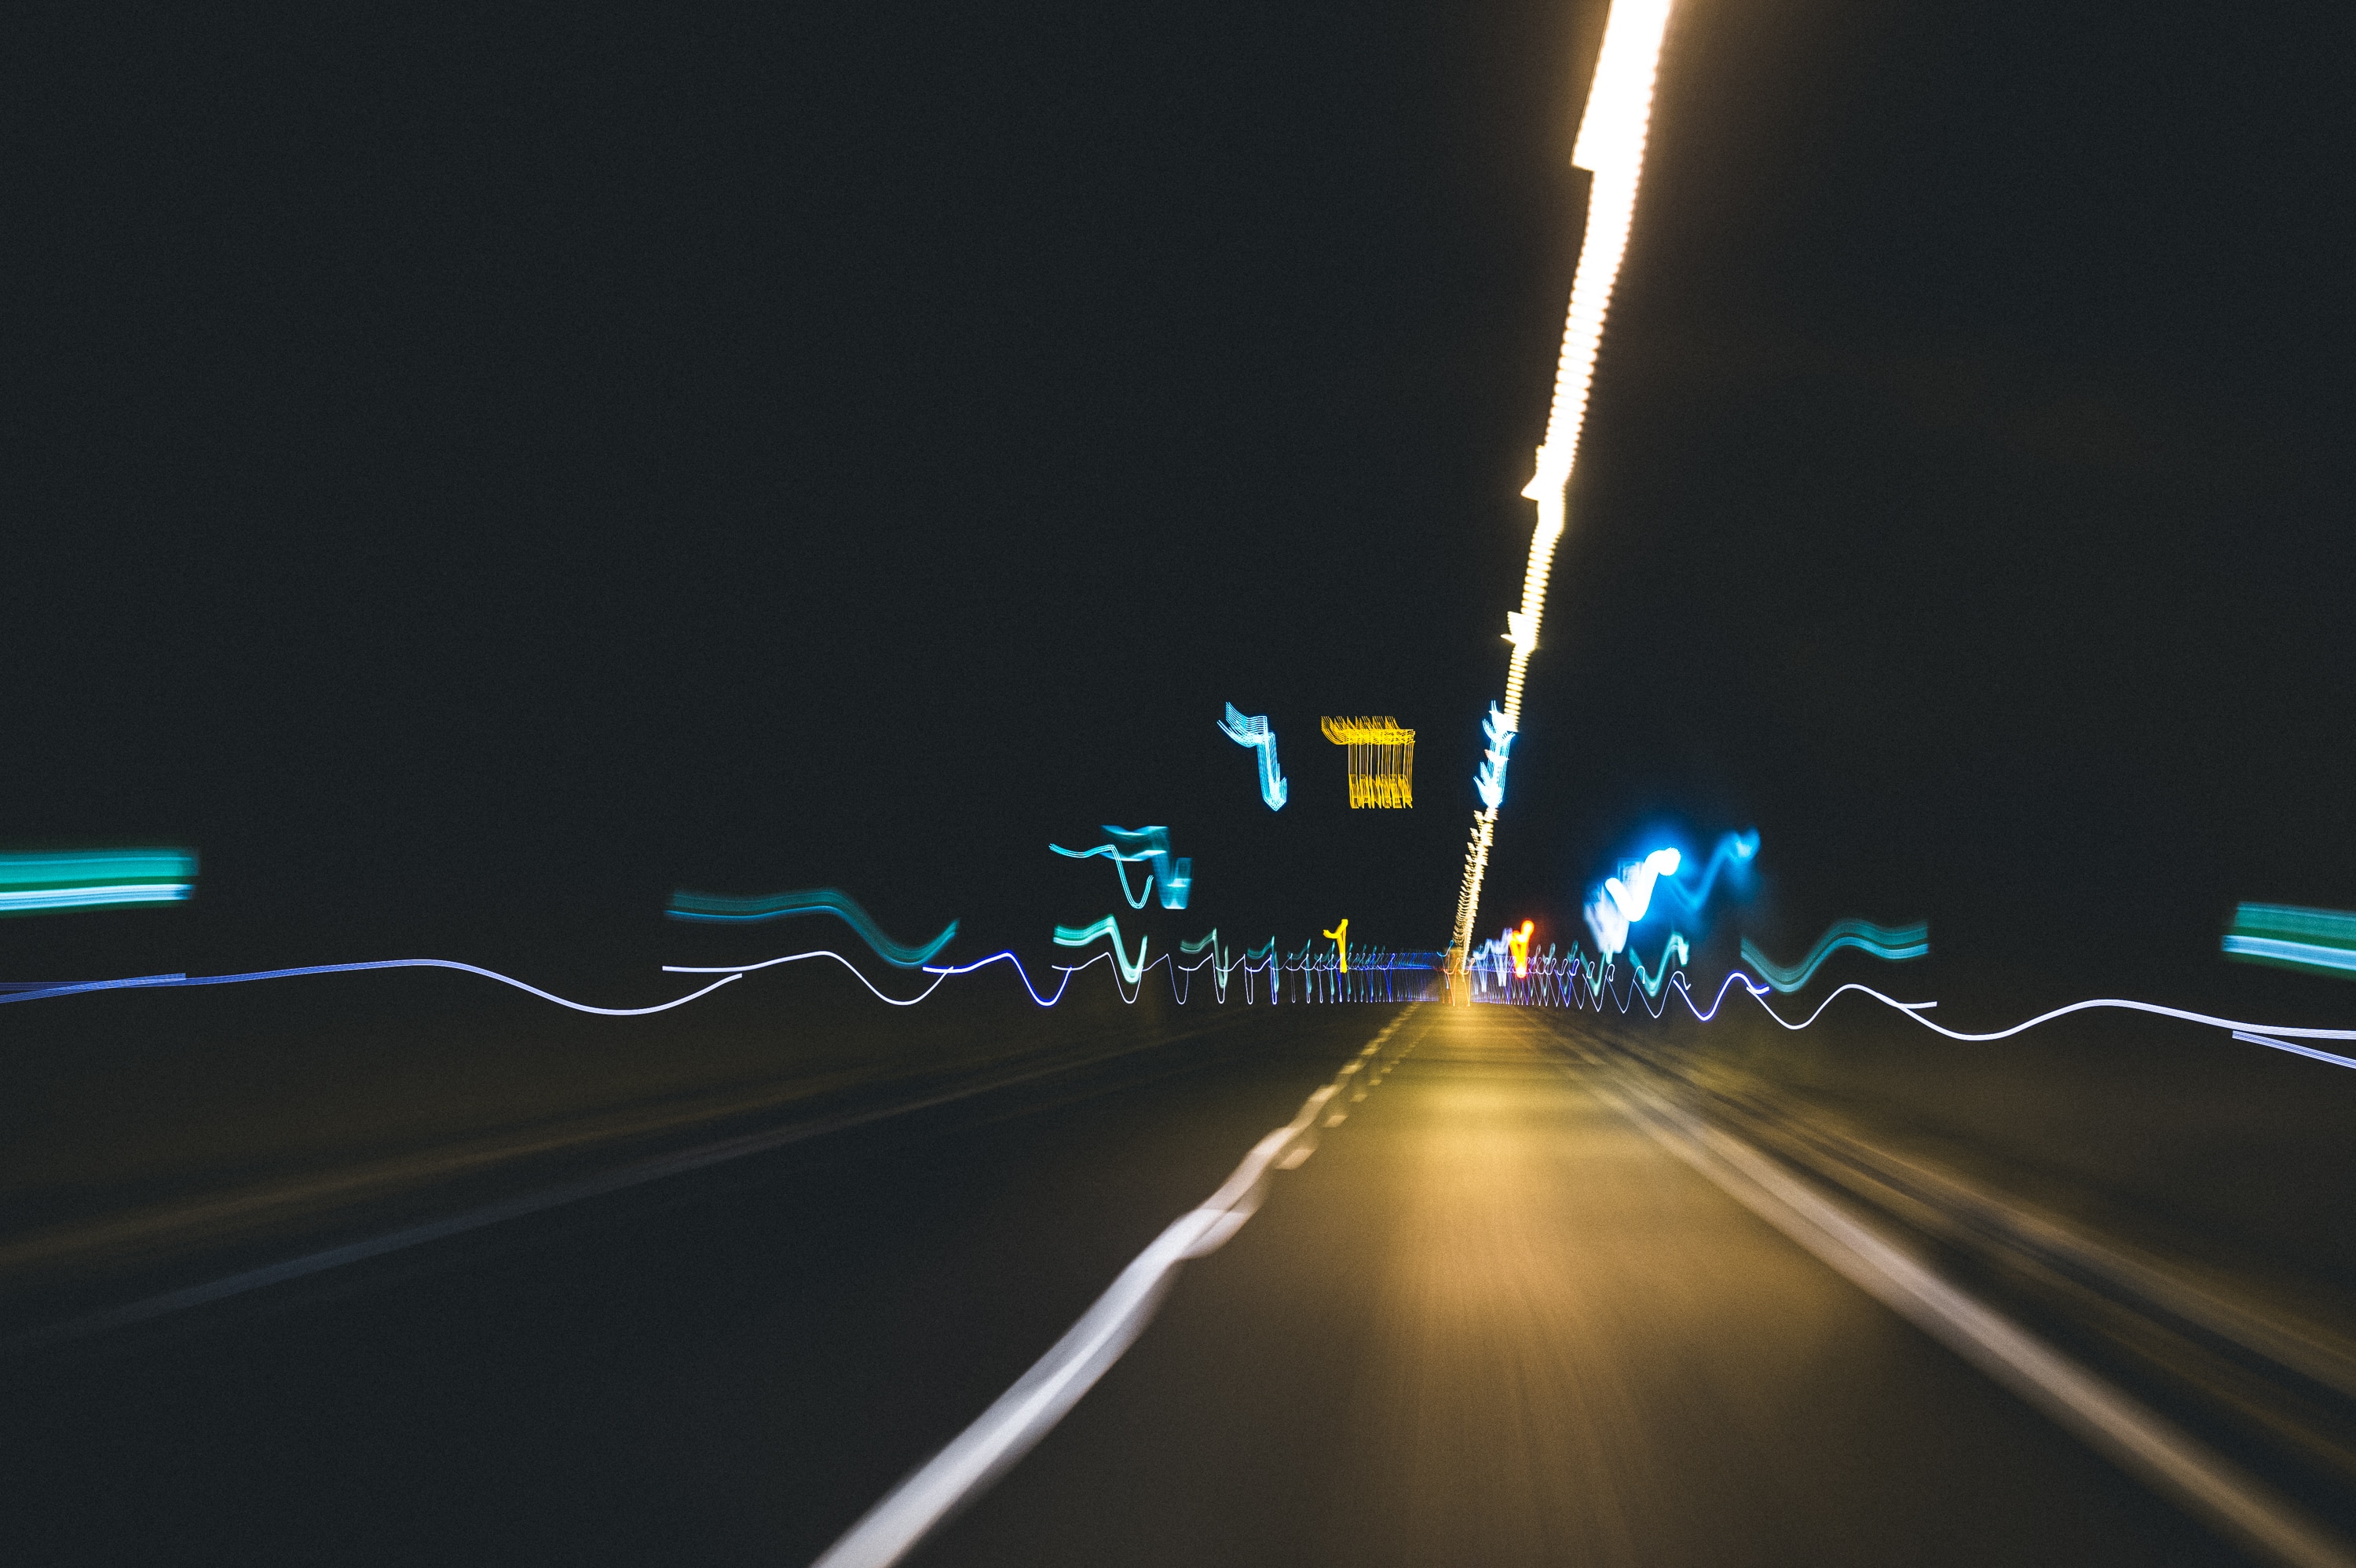 timeplapse photography of roads at night